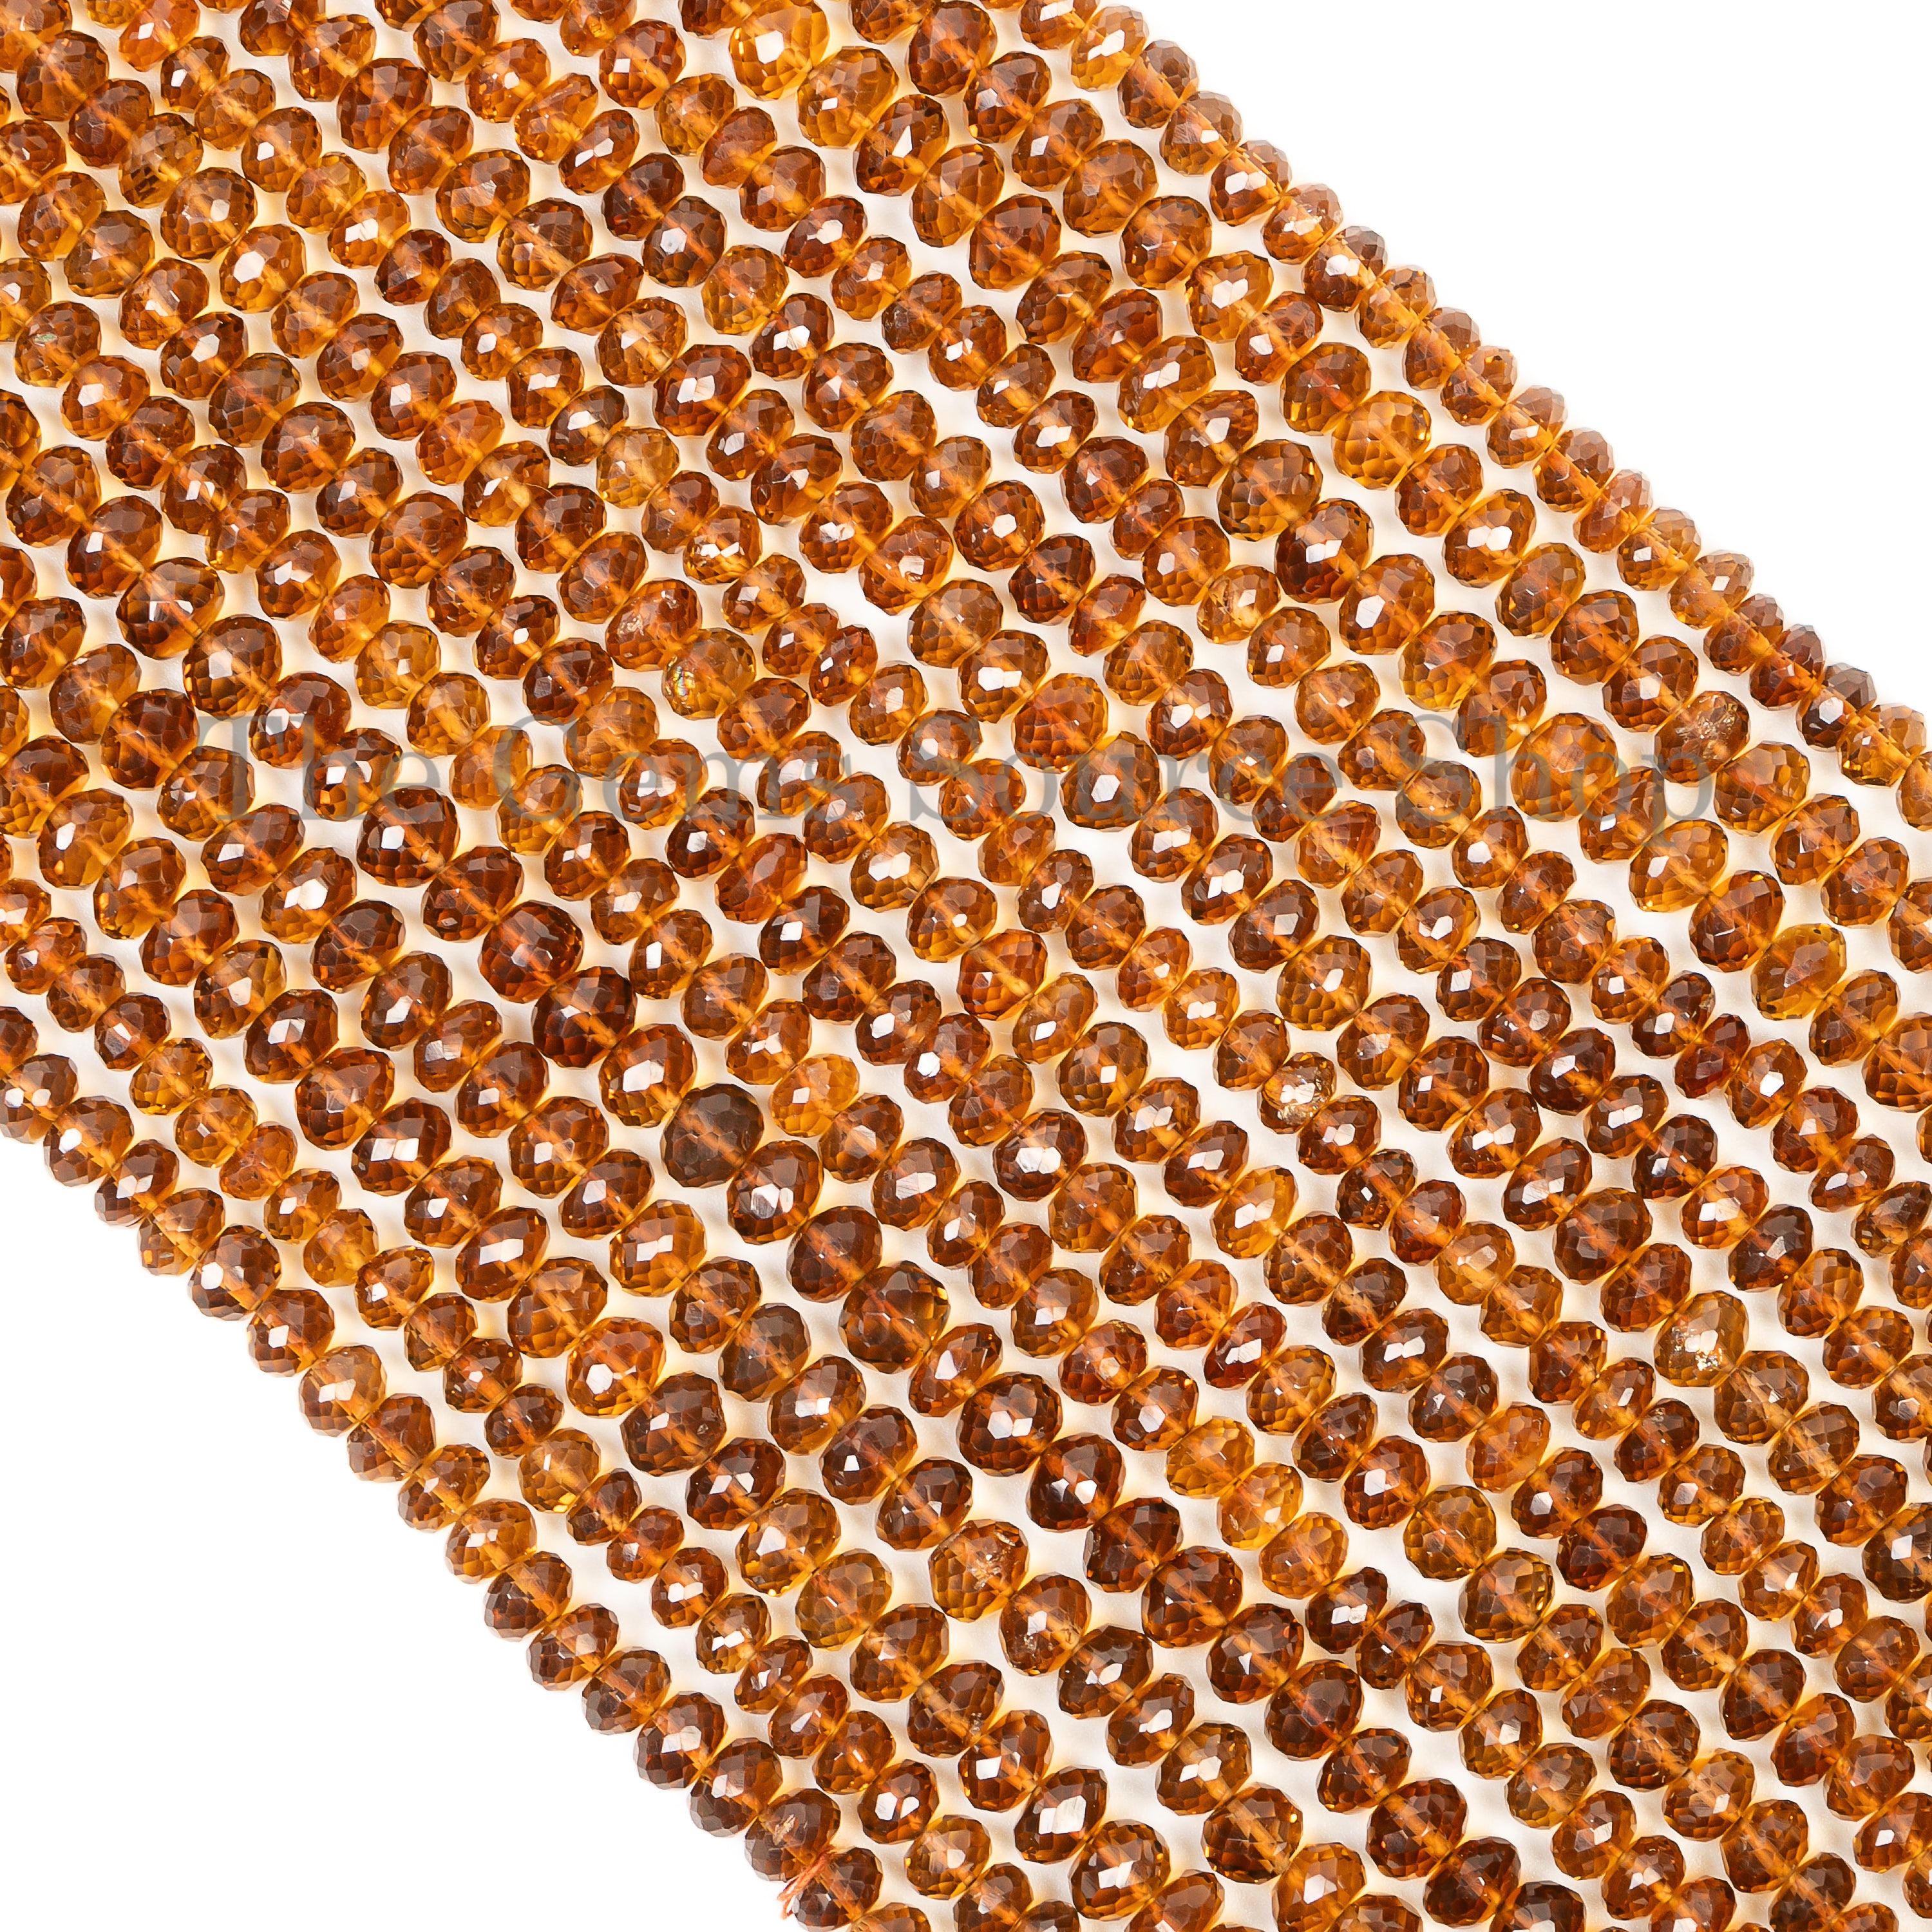 Whisky Quartz  Faceted Rondelle Loose Gemstone Beads TGS-1624